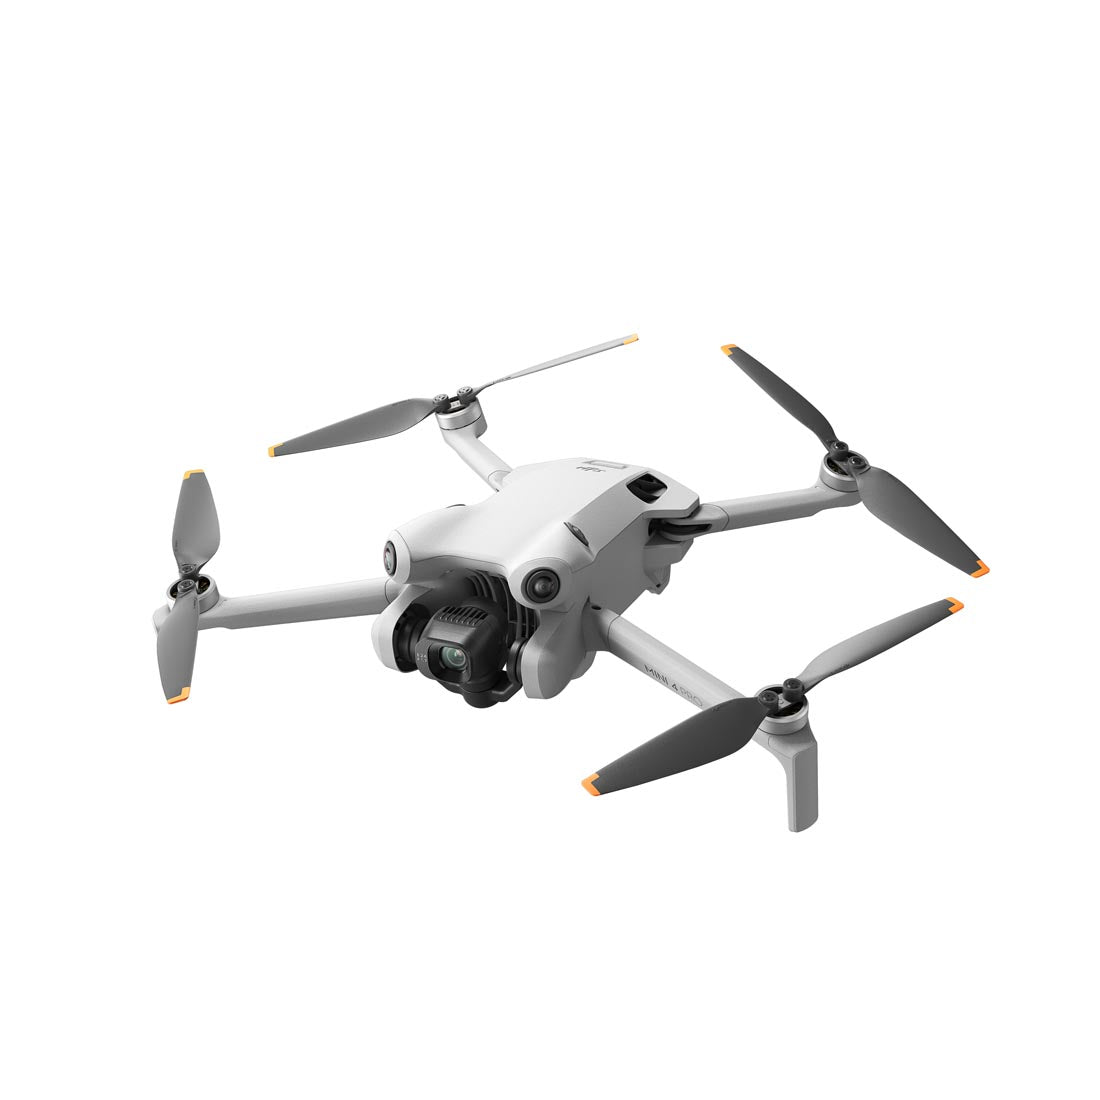 DJI Mavic Mini Drone Aircraft Replacement (Exclude Remote, Battery